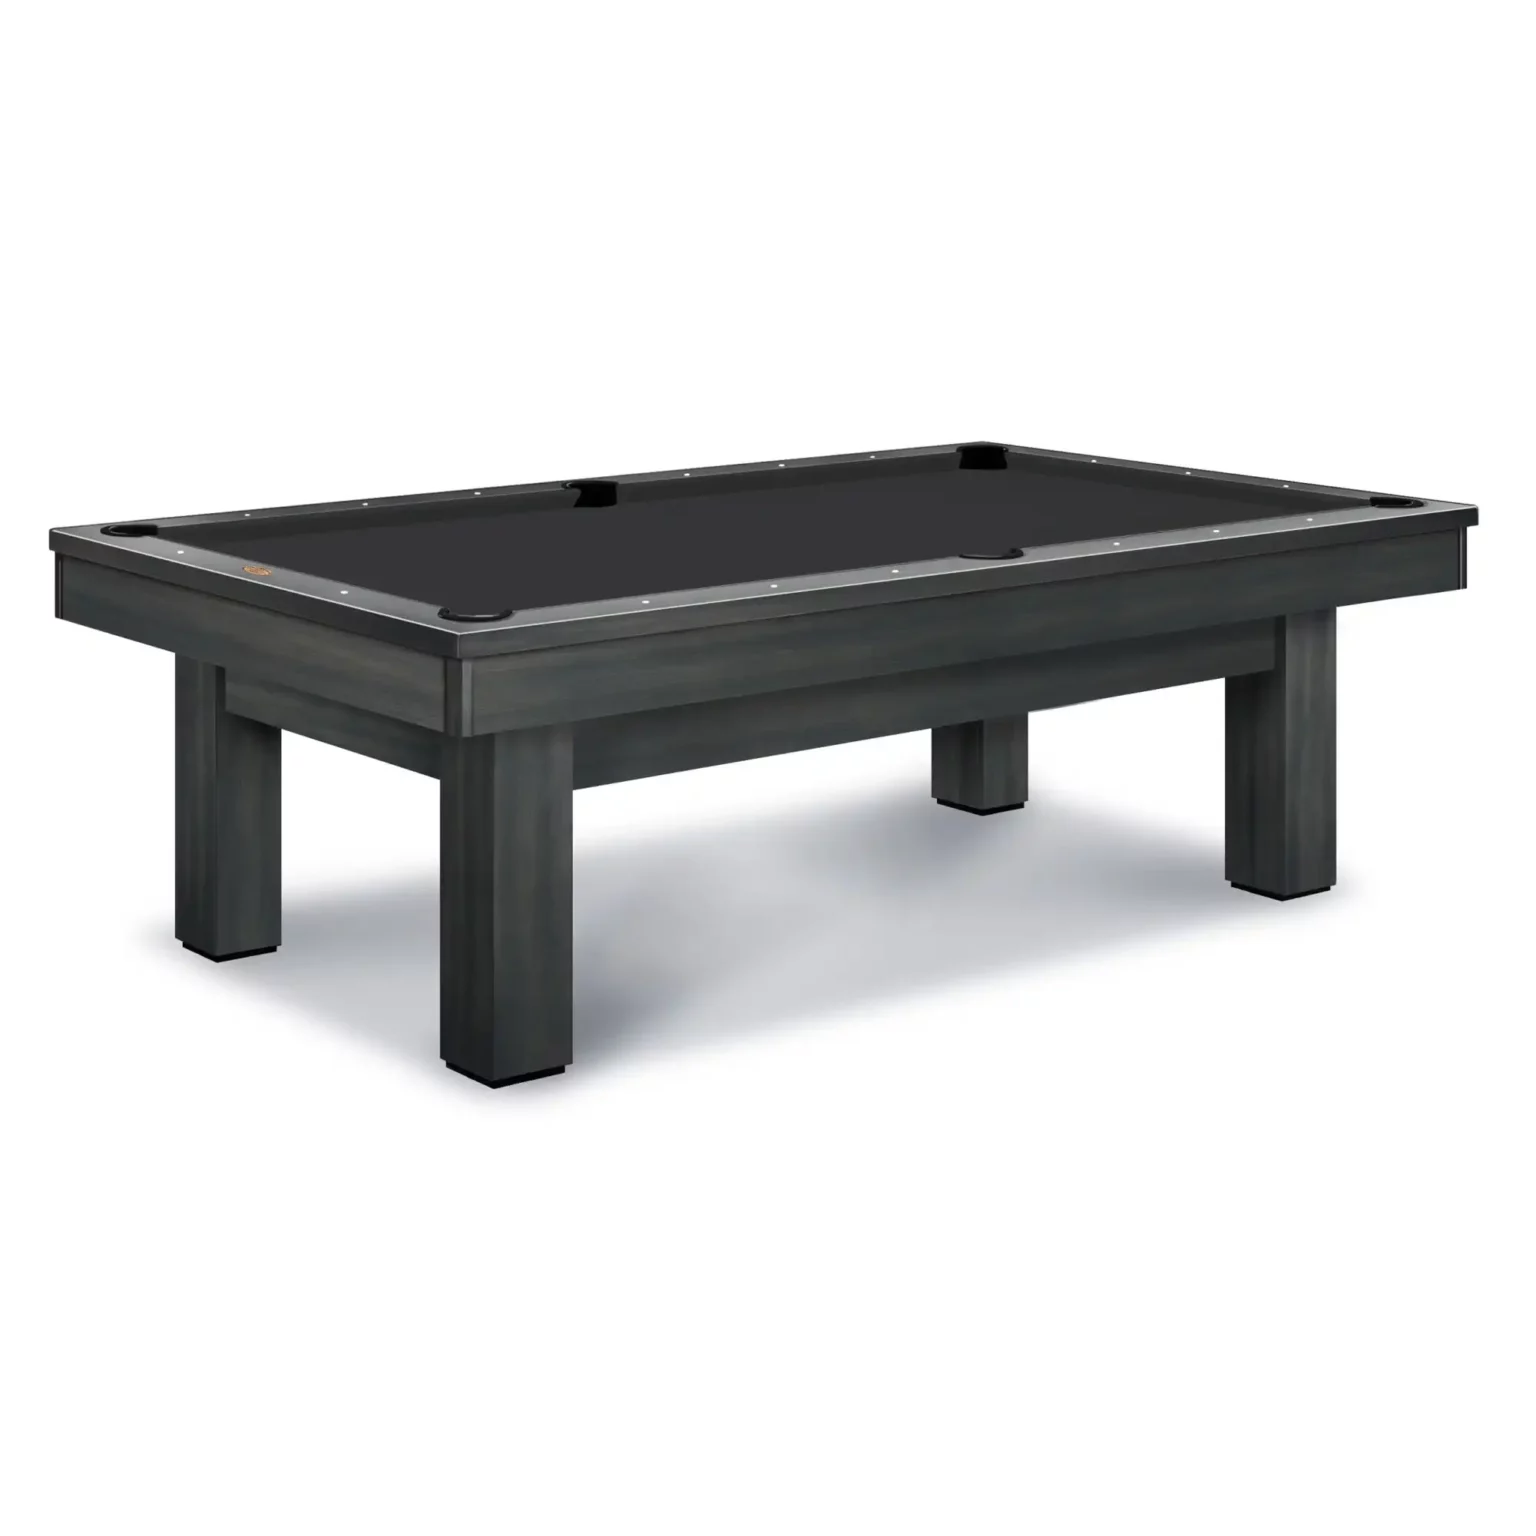 Olhausen West End pool table